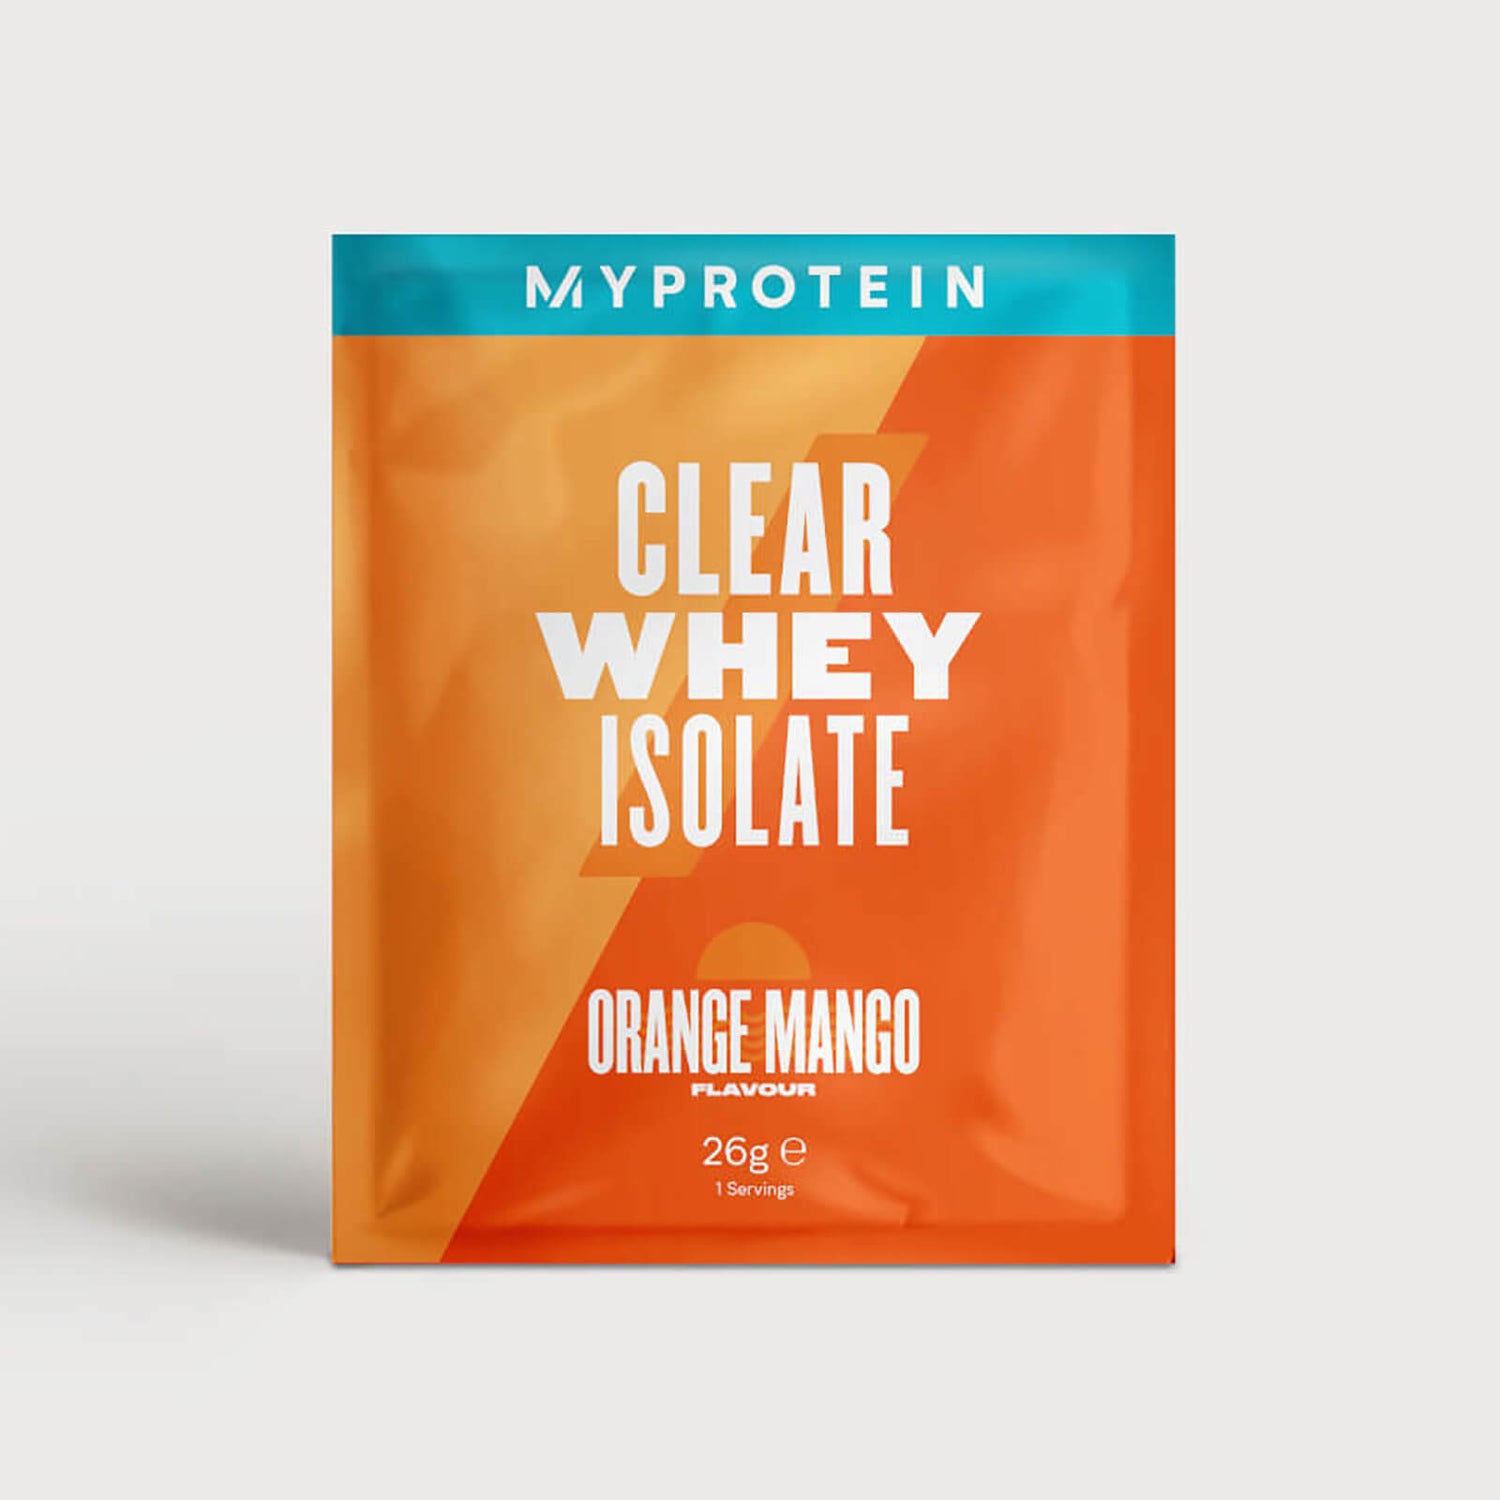 Myprotein Clear Whey Isolate (Sample) (AU) - 1servings - Watermelon